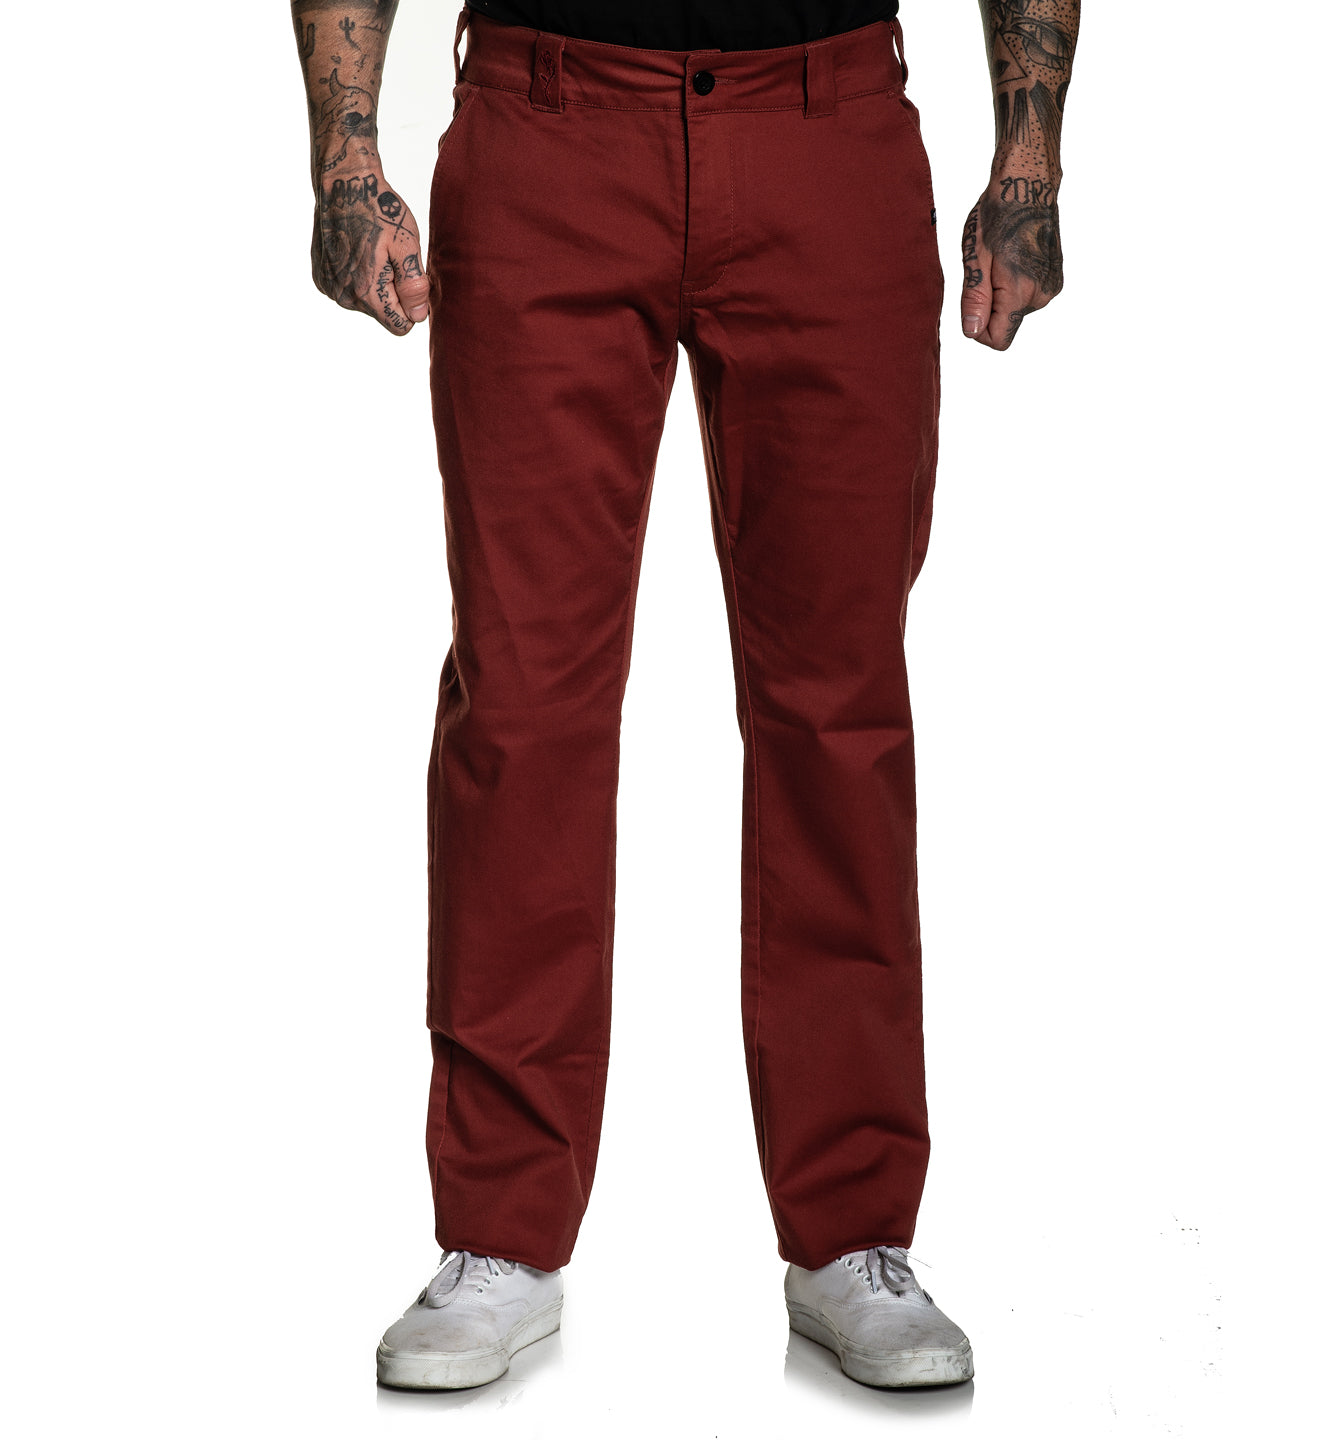 925 Relaxed fit Chino Stretch Pant Cherry Mahogany